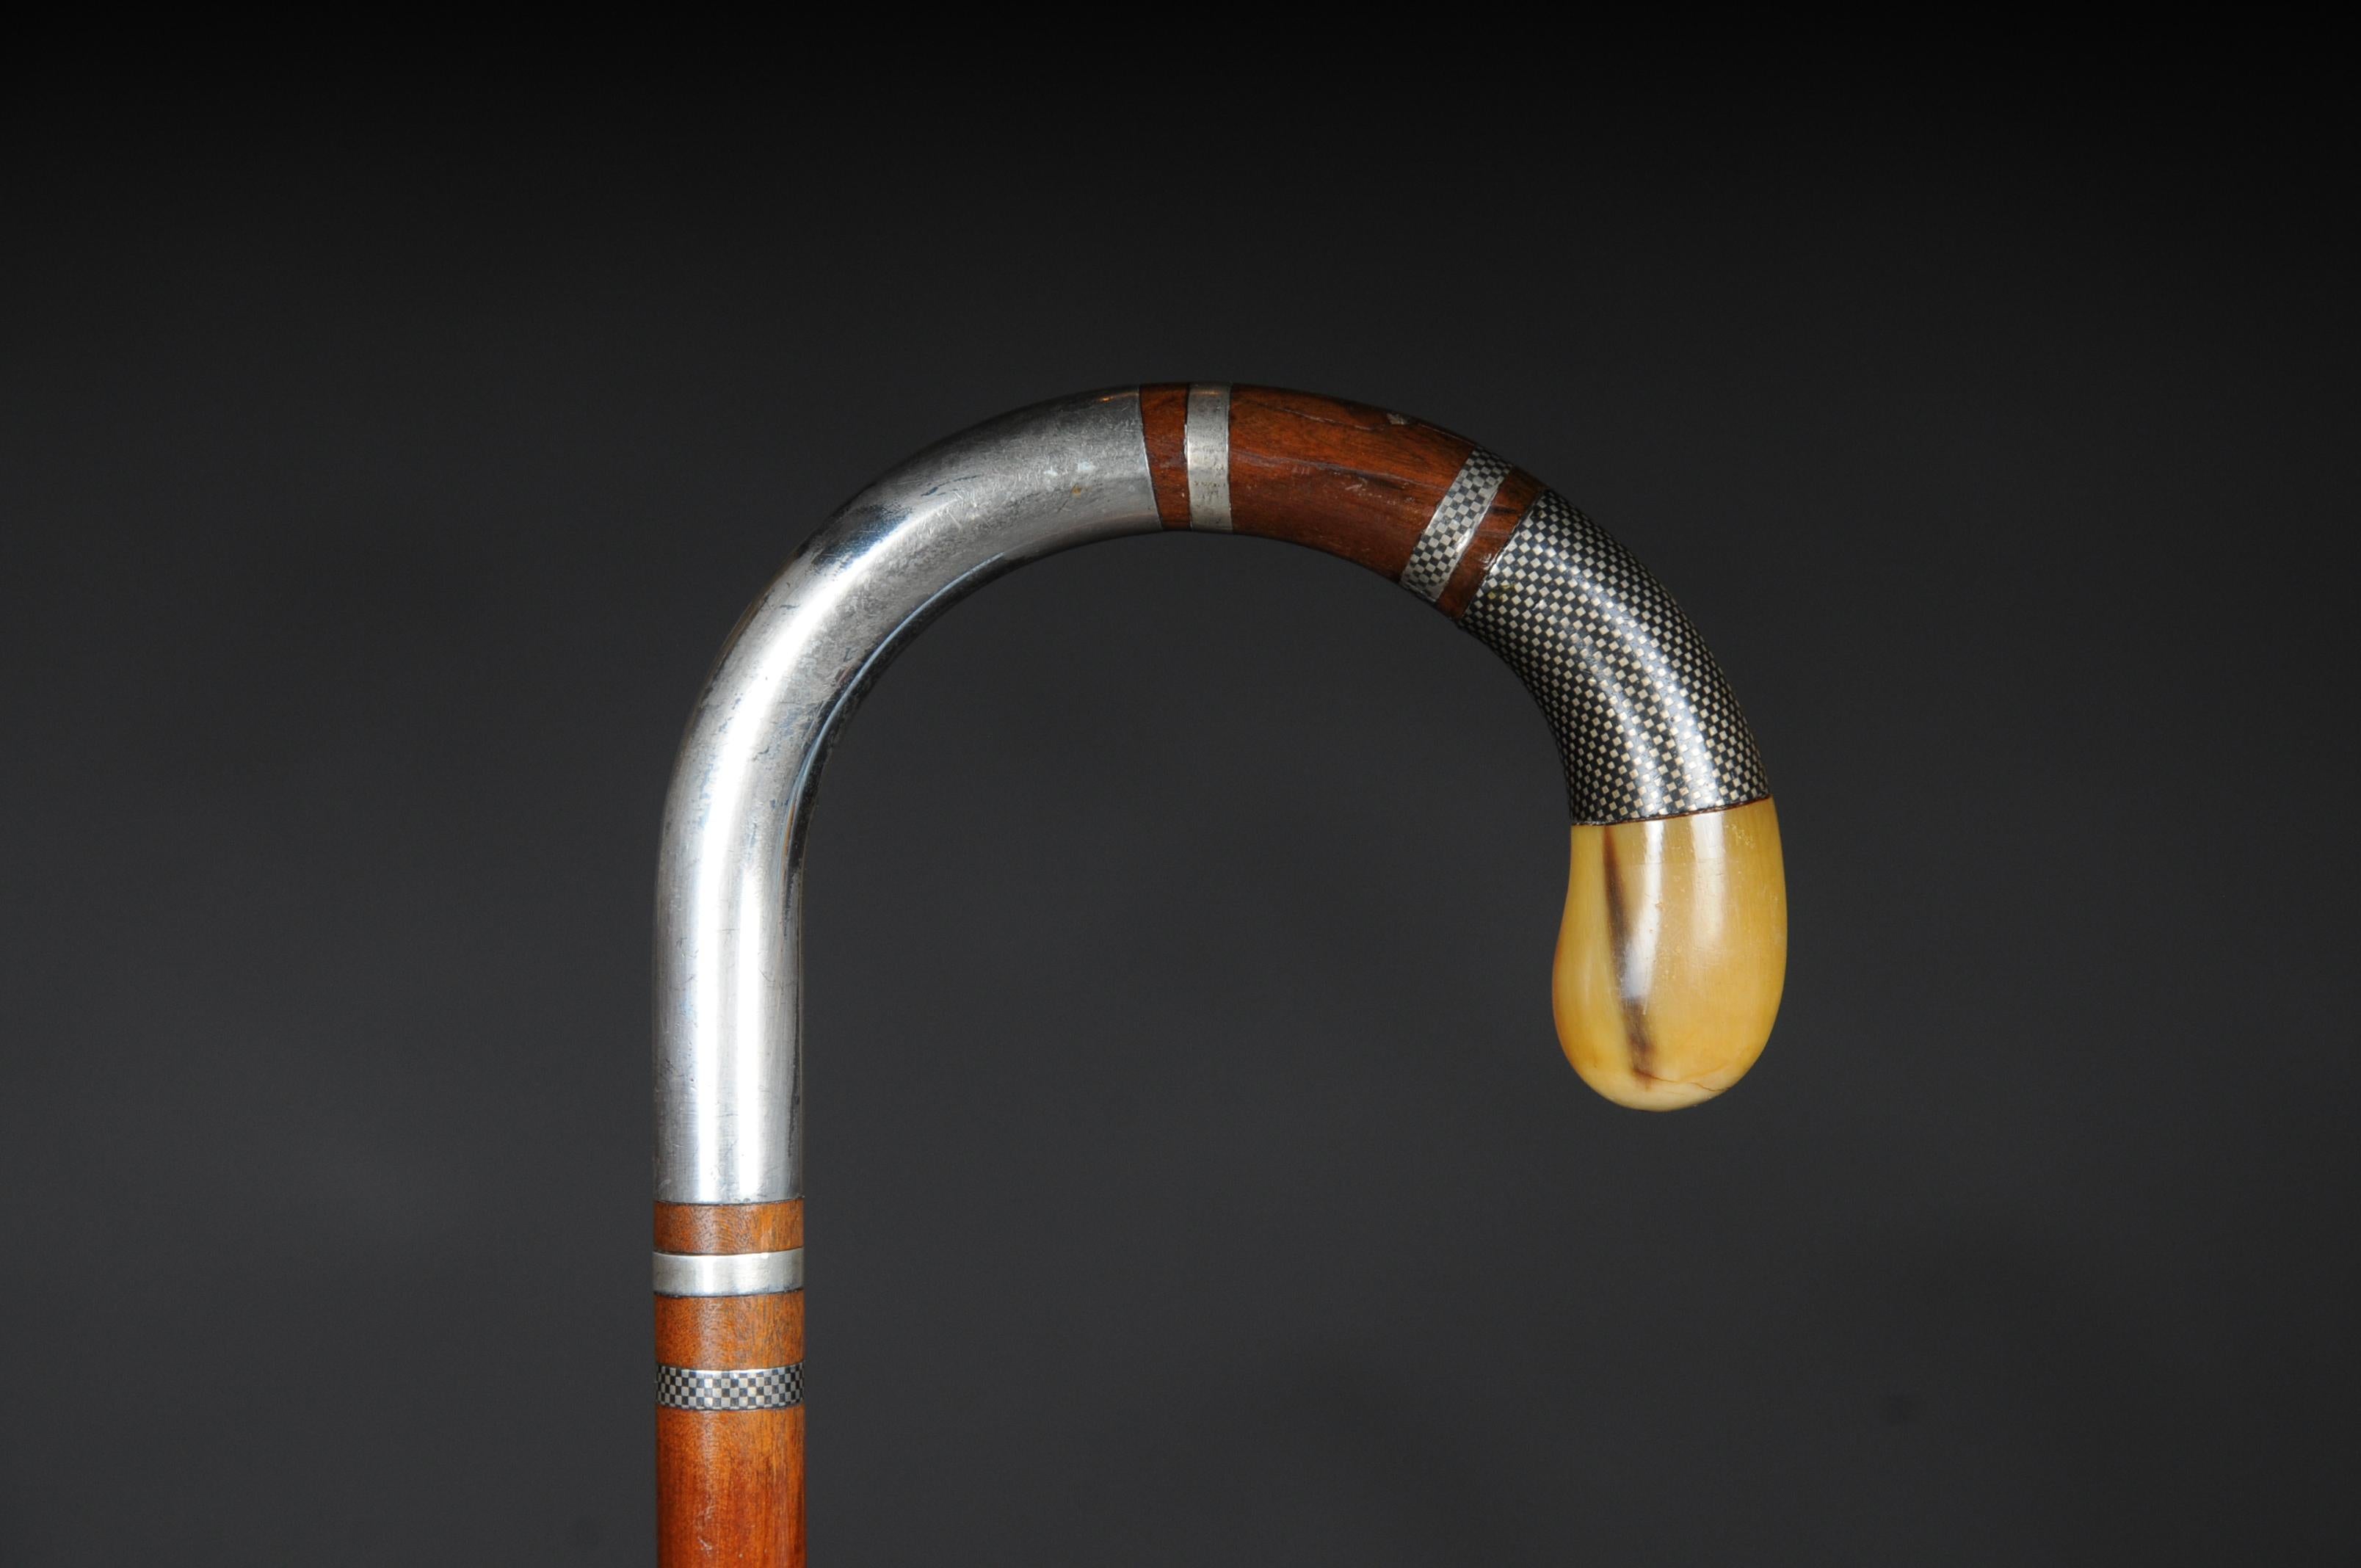 Impressive walking stick / strolling stick 835 silver, pearwood

Solid pearwood with 835 crescent moon and silver mount crown, circa 19th century. The spout at the end of the stick is also made of 835 silver. The handle end is finished with Horn.